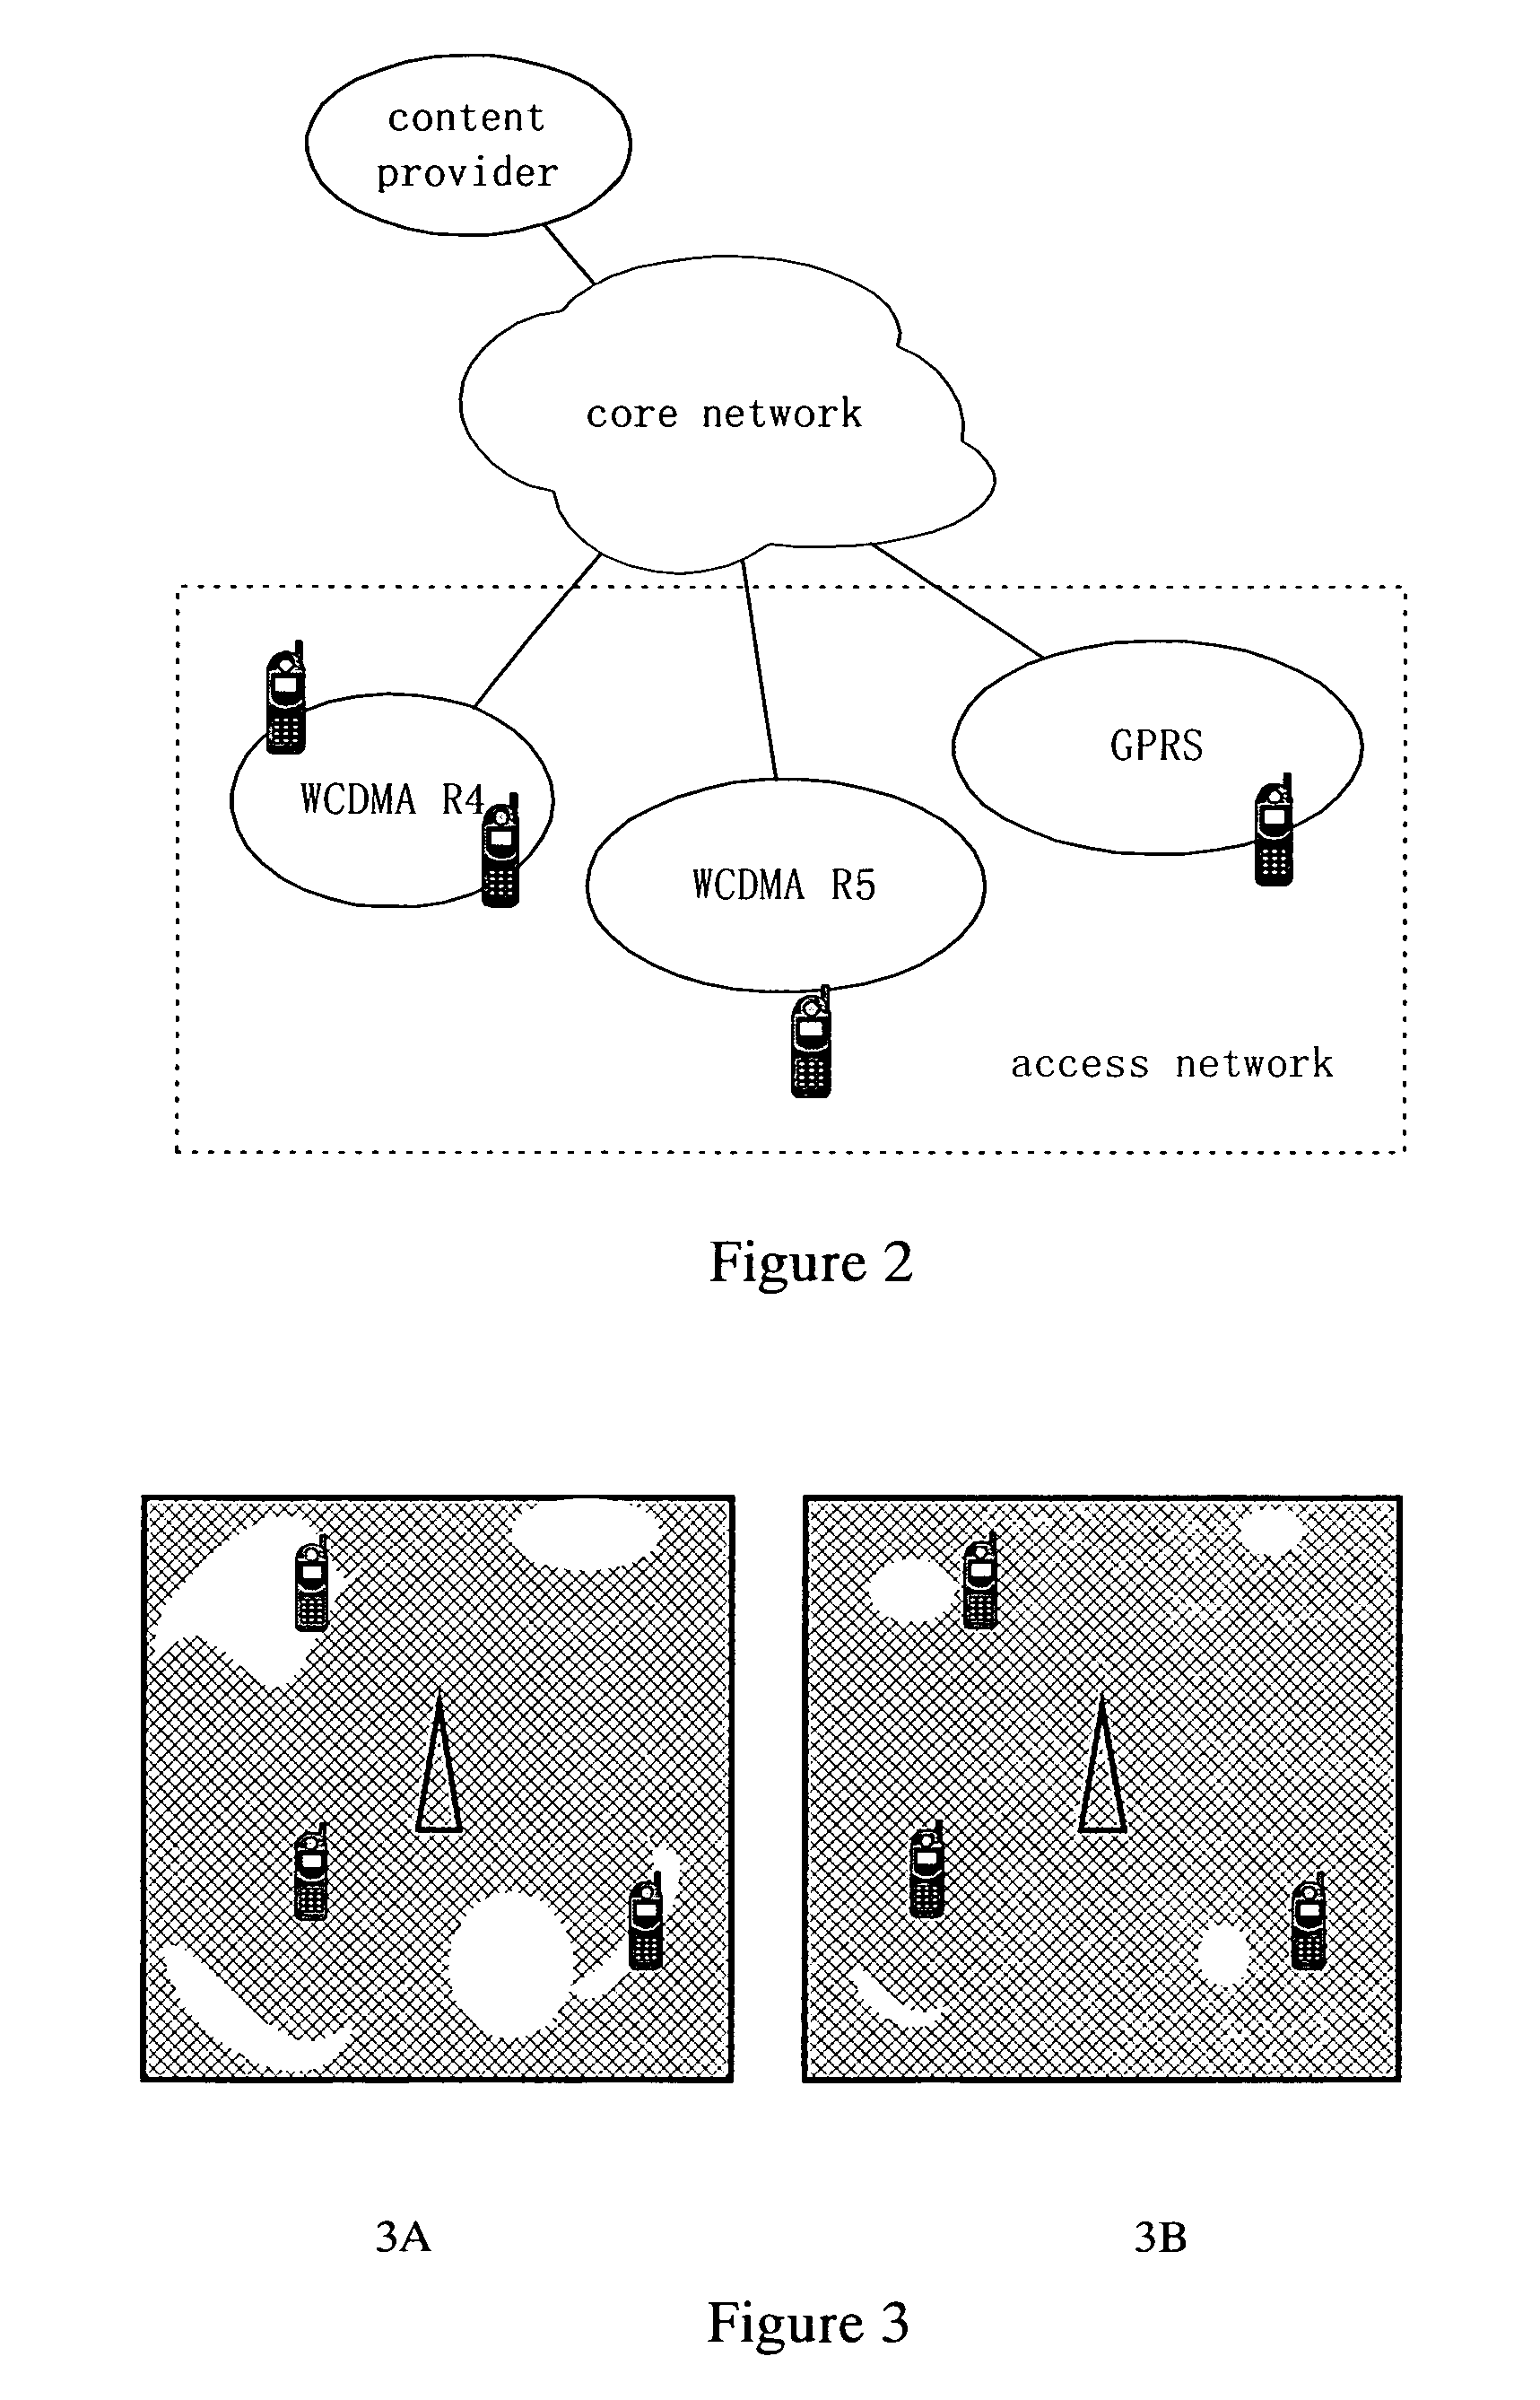 Method of implementing multicasting service